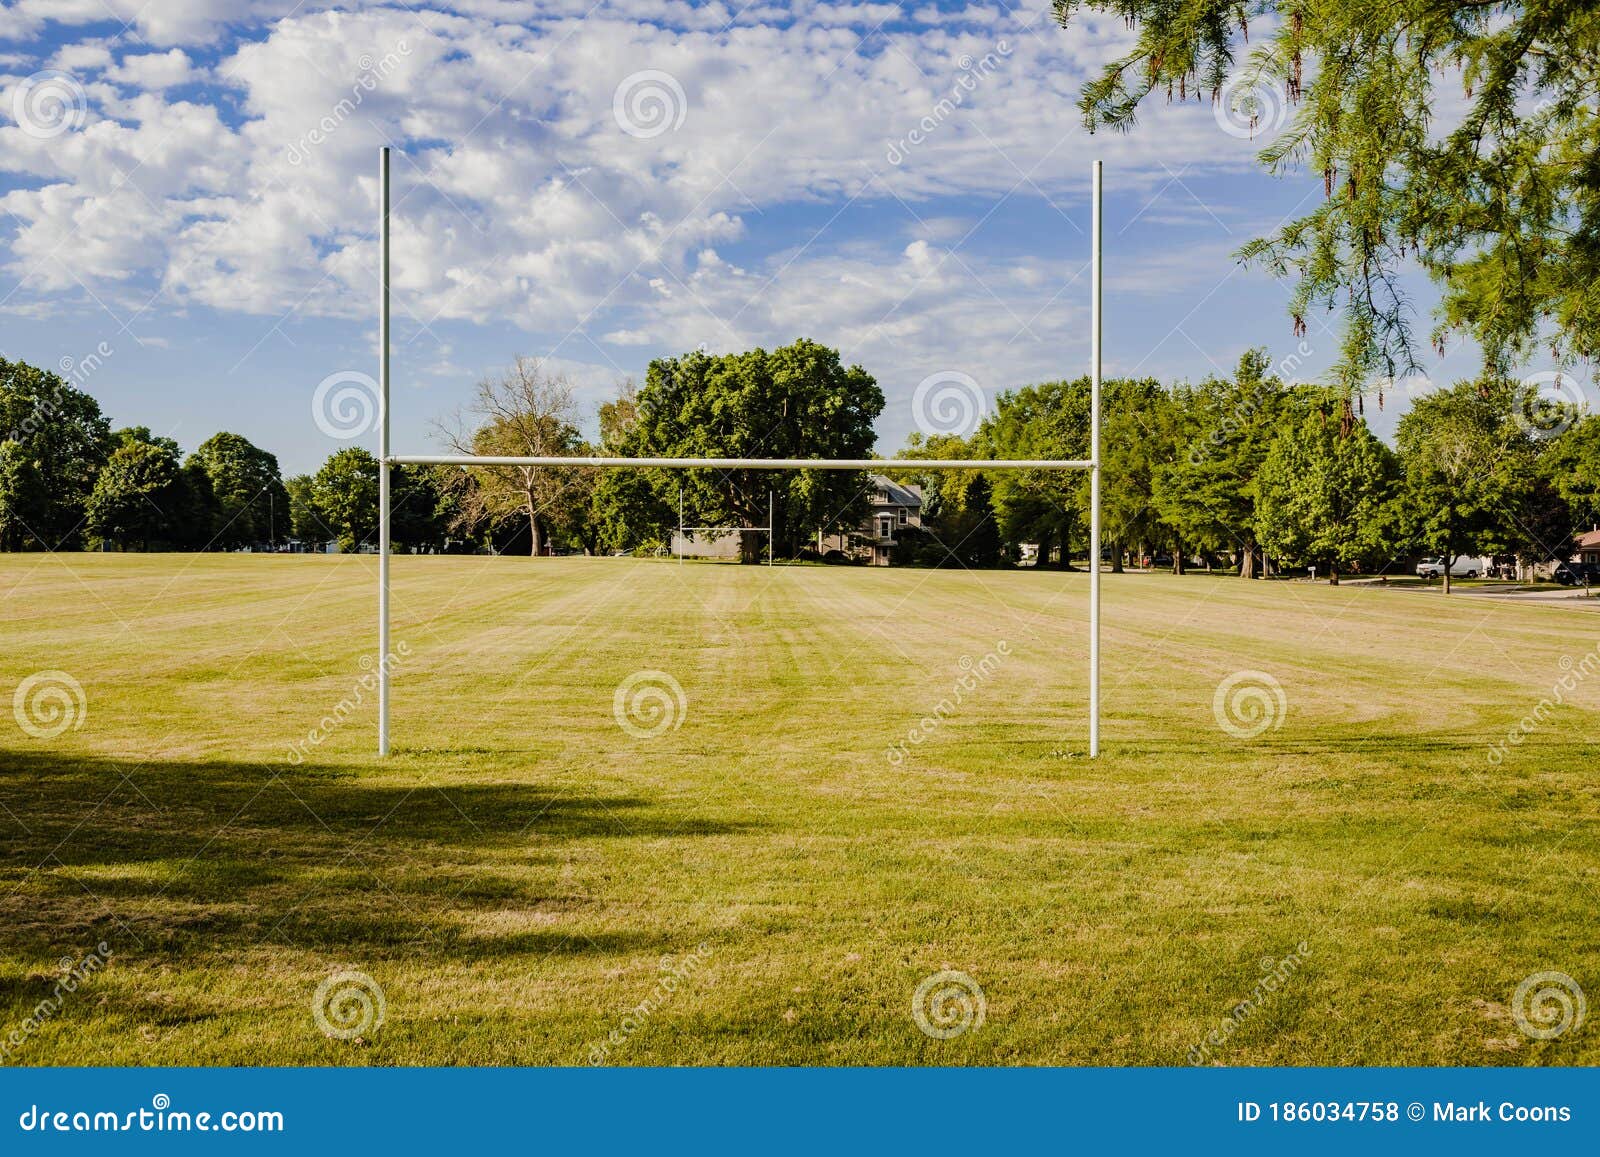 The view from the end zone of a youth football field in a city park